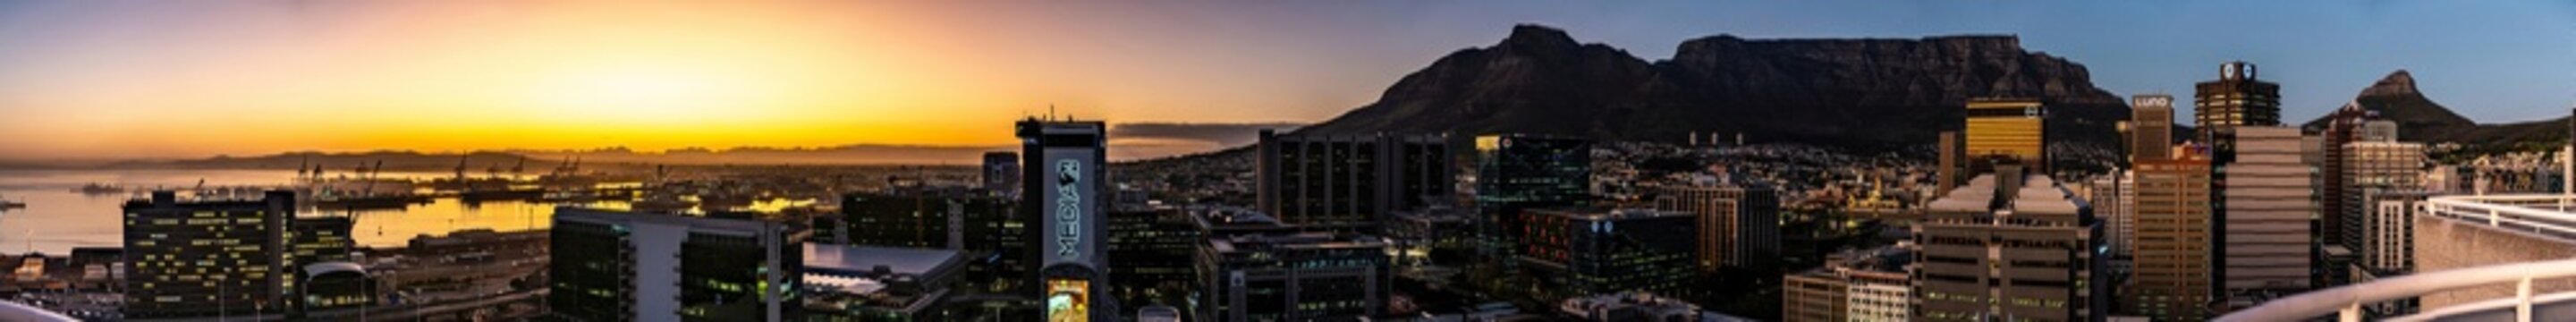 Cape Town, South Africa, at sunrise. View from a skyscraper